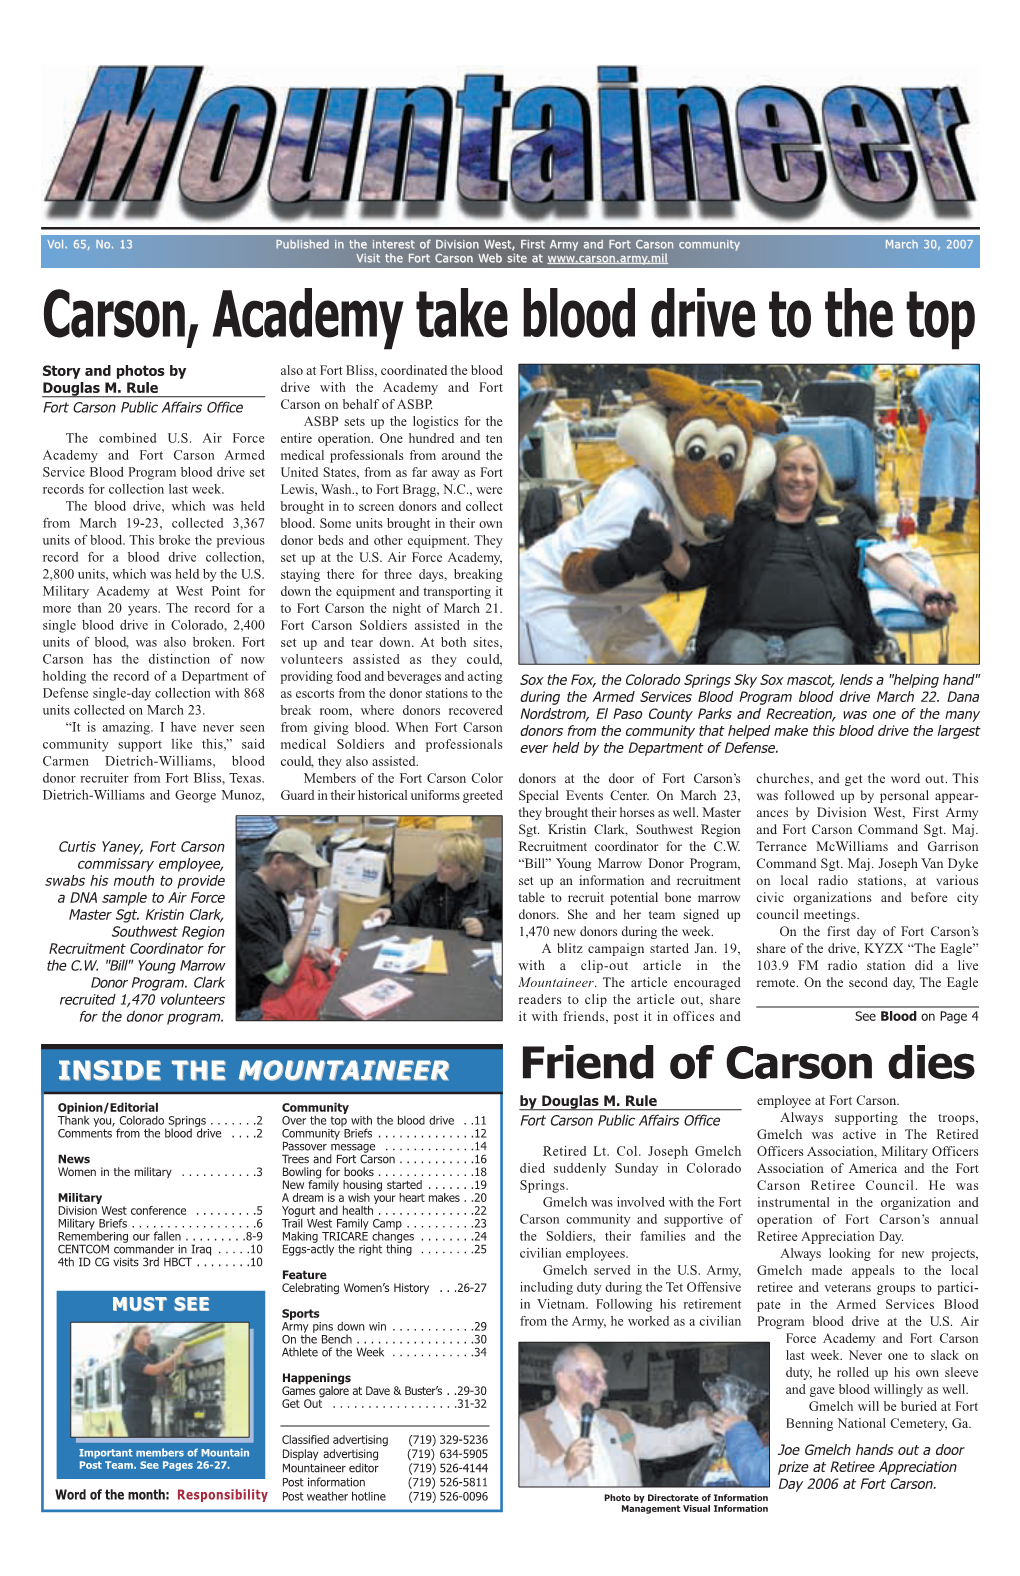 Carson, Academy Take Blood Drive to the Top